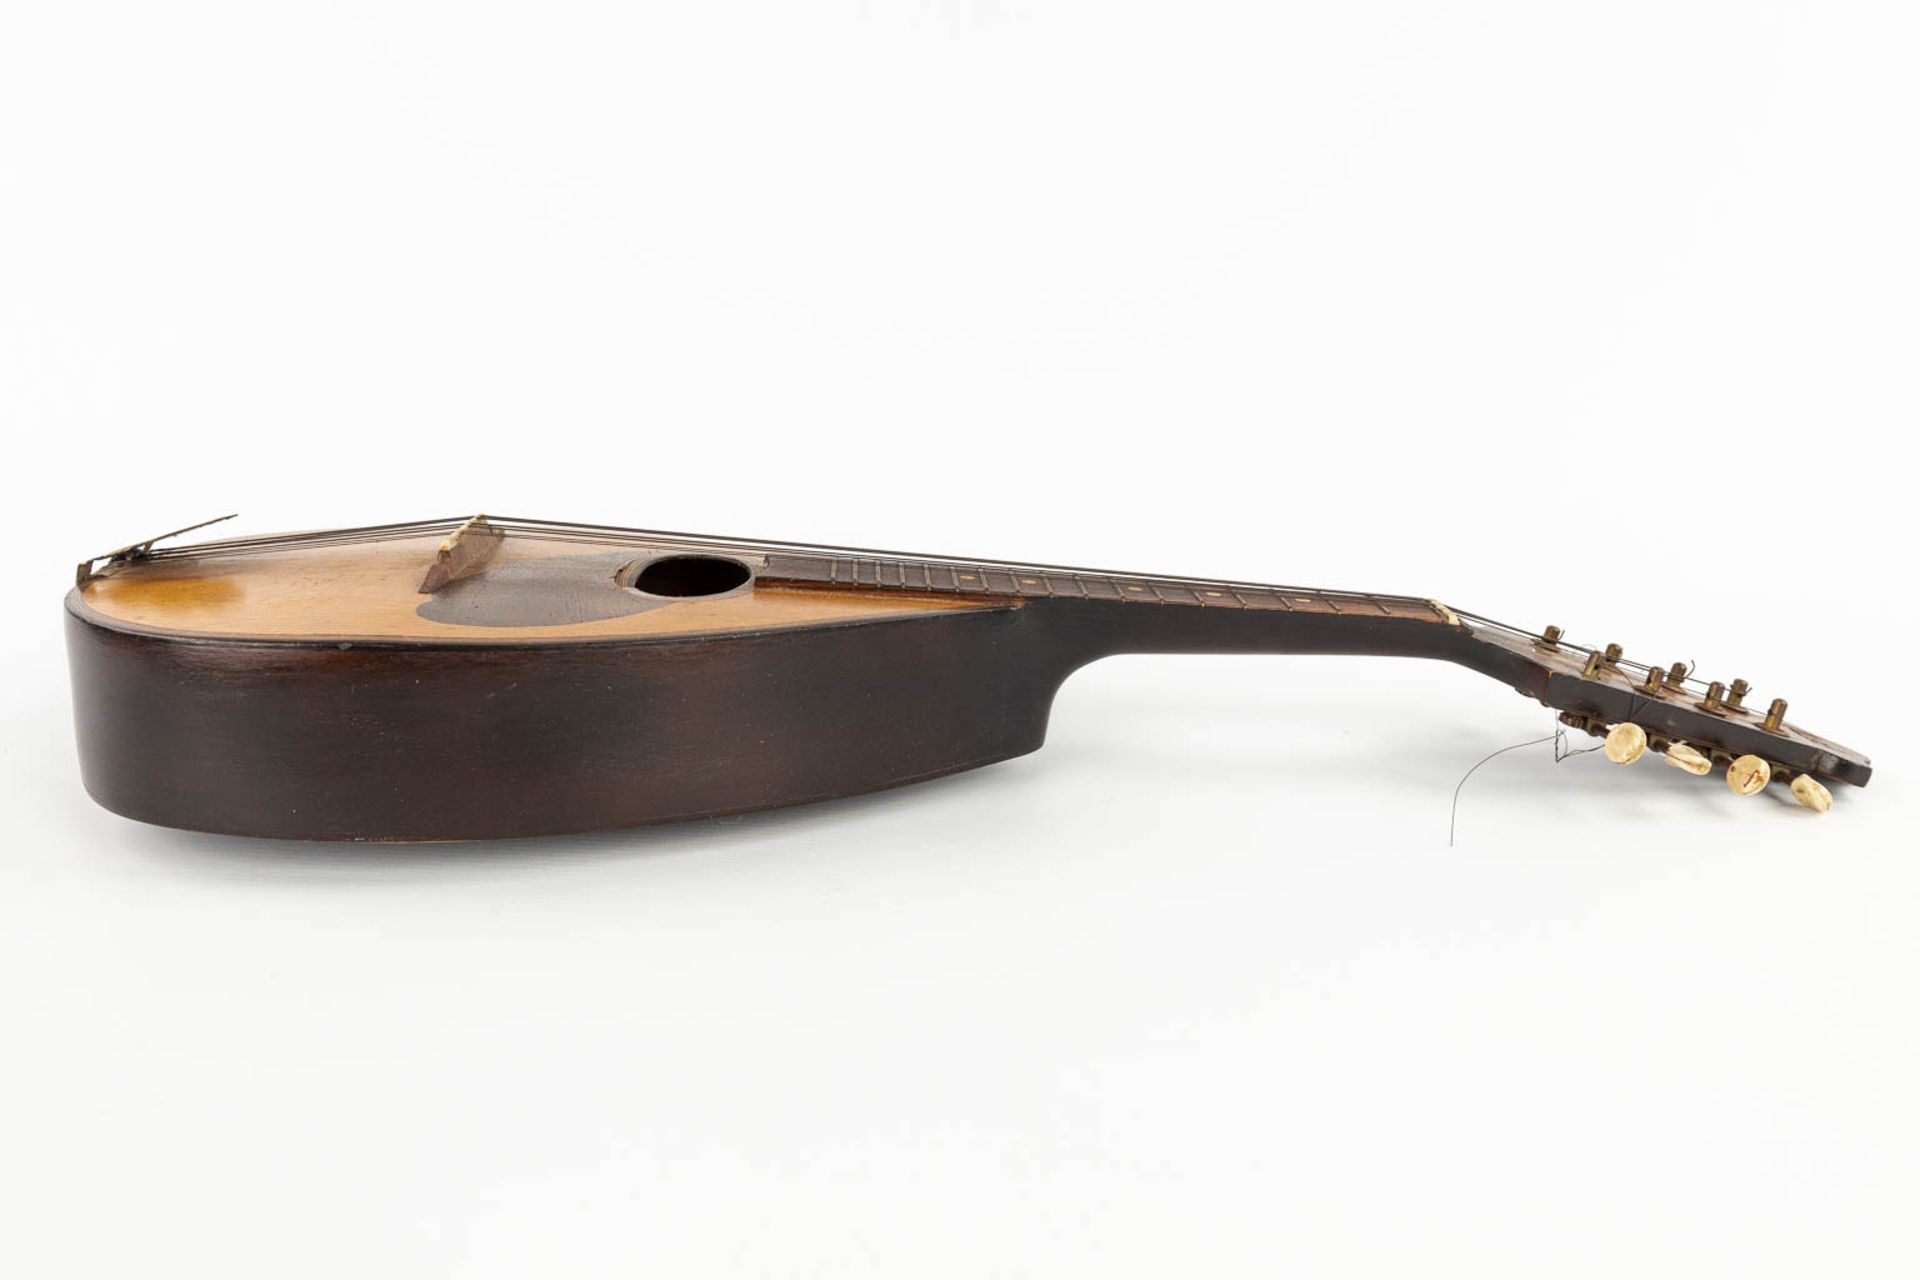 Two mandolines, of which one is marked Fratelli Umberto. (L:20 x W:60 x H:14 cm) - Image 20 of 20